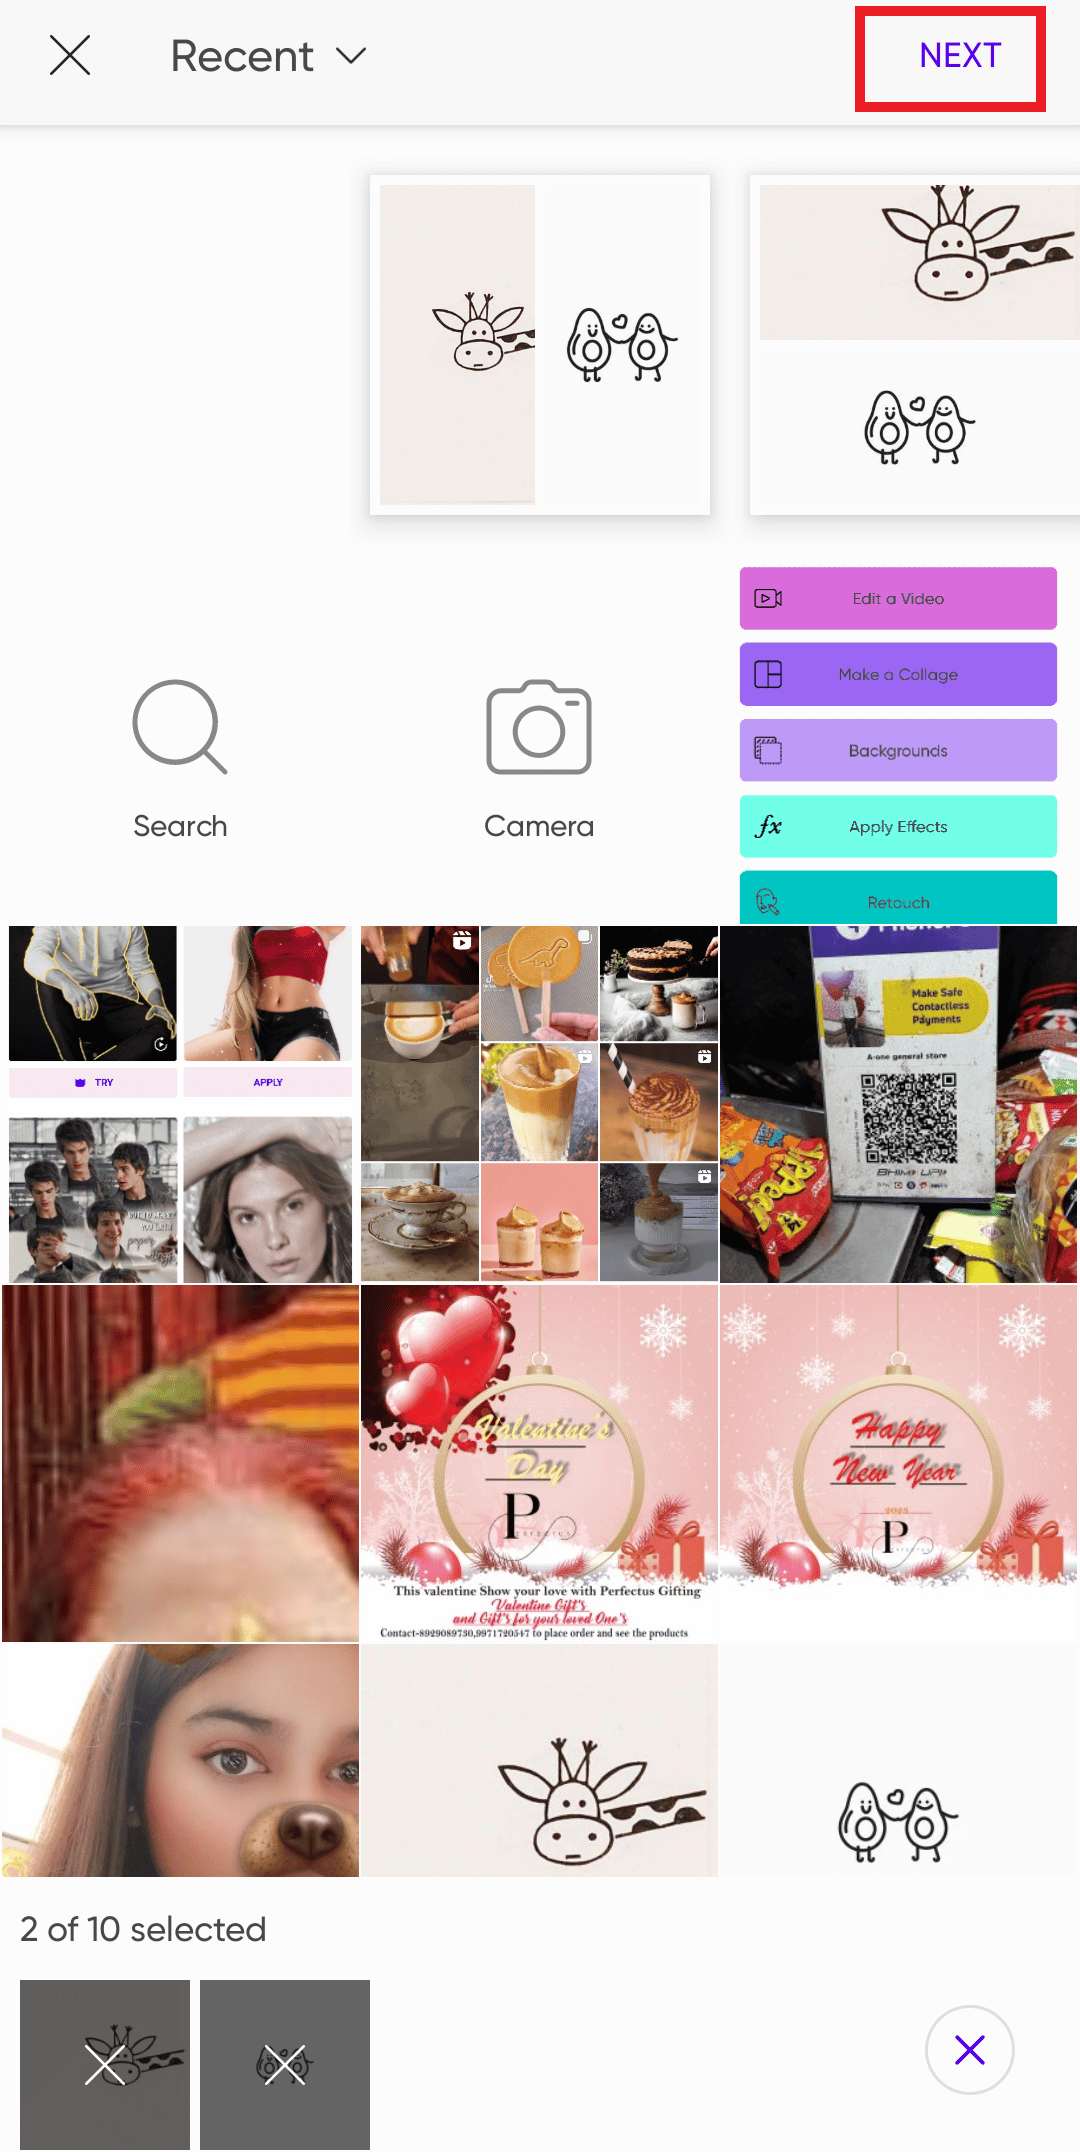 select the two photos you wish to include for the challenge and tap on NEXT